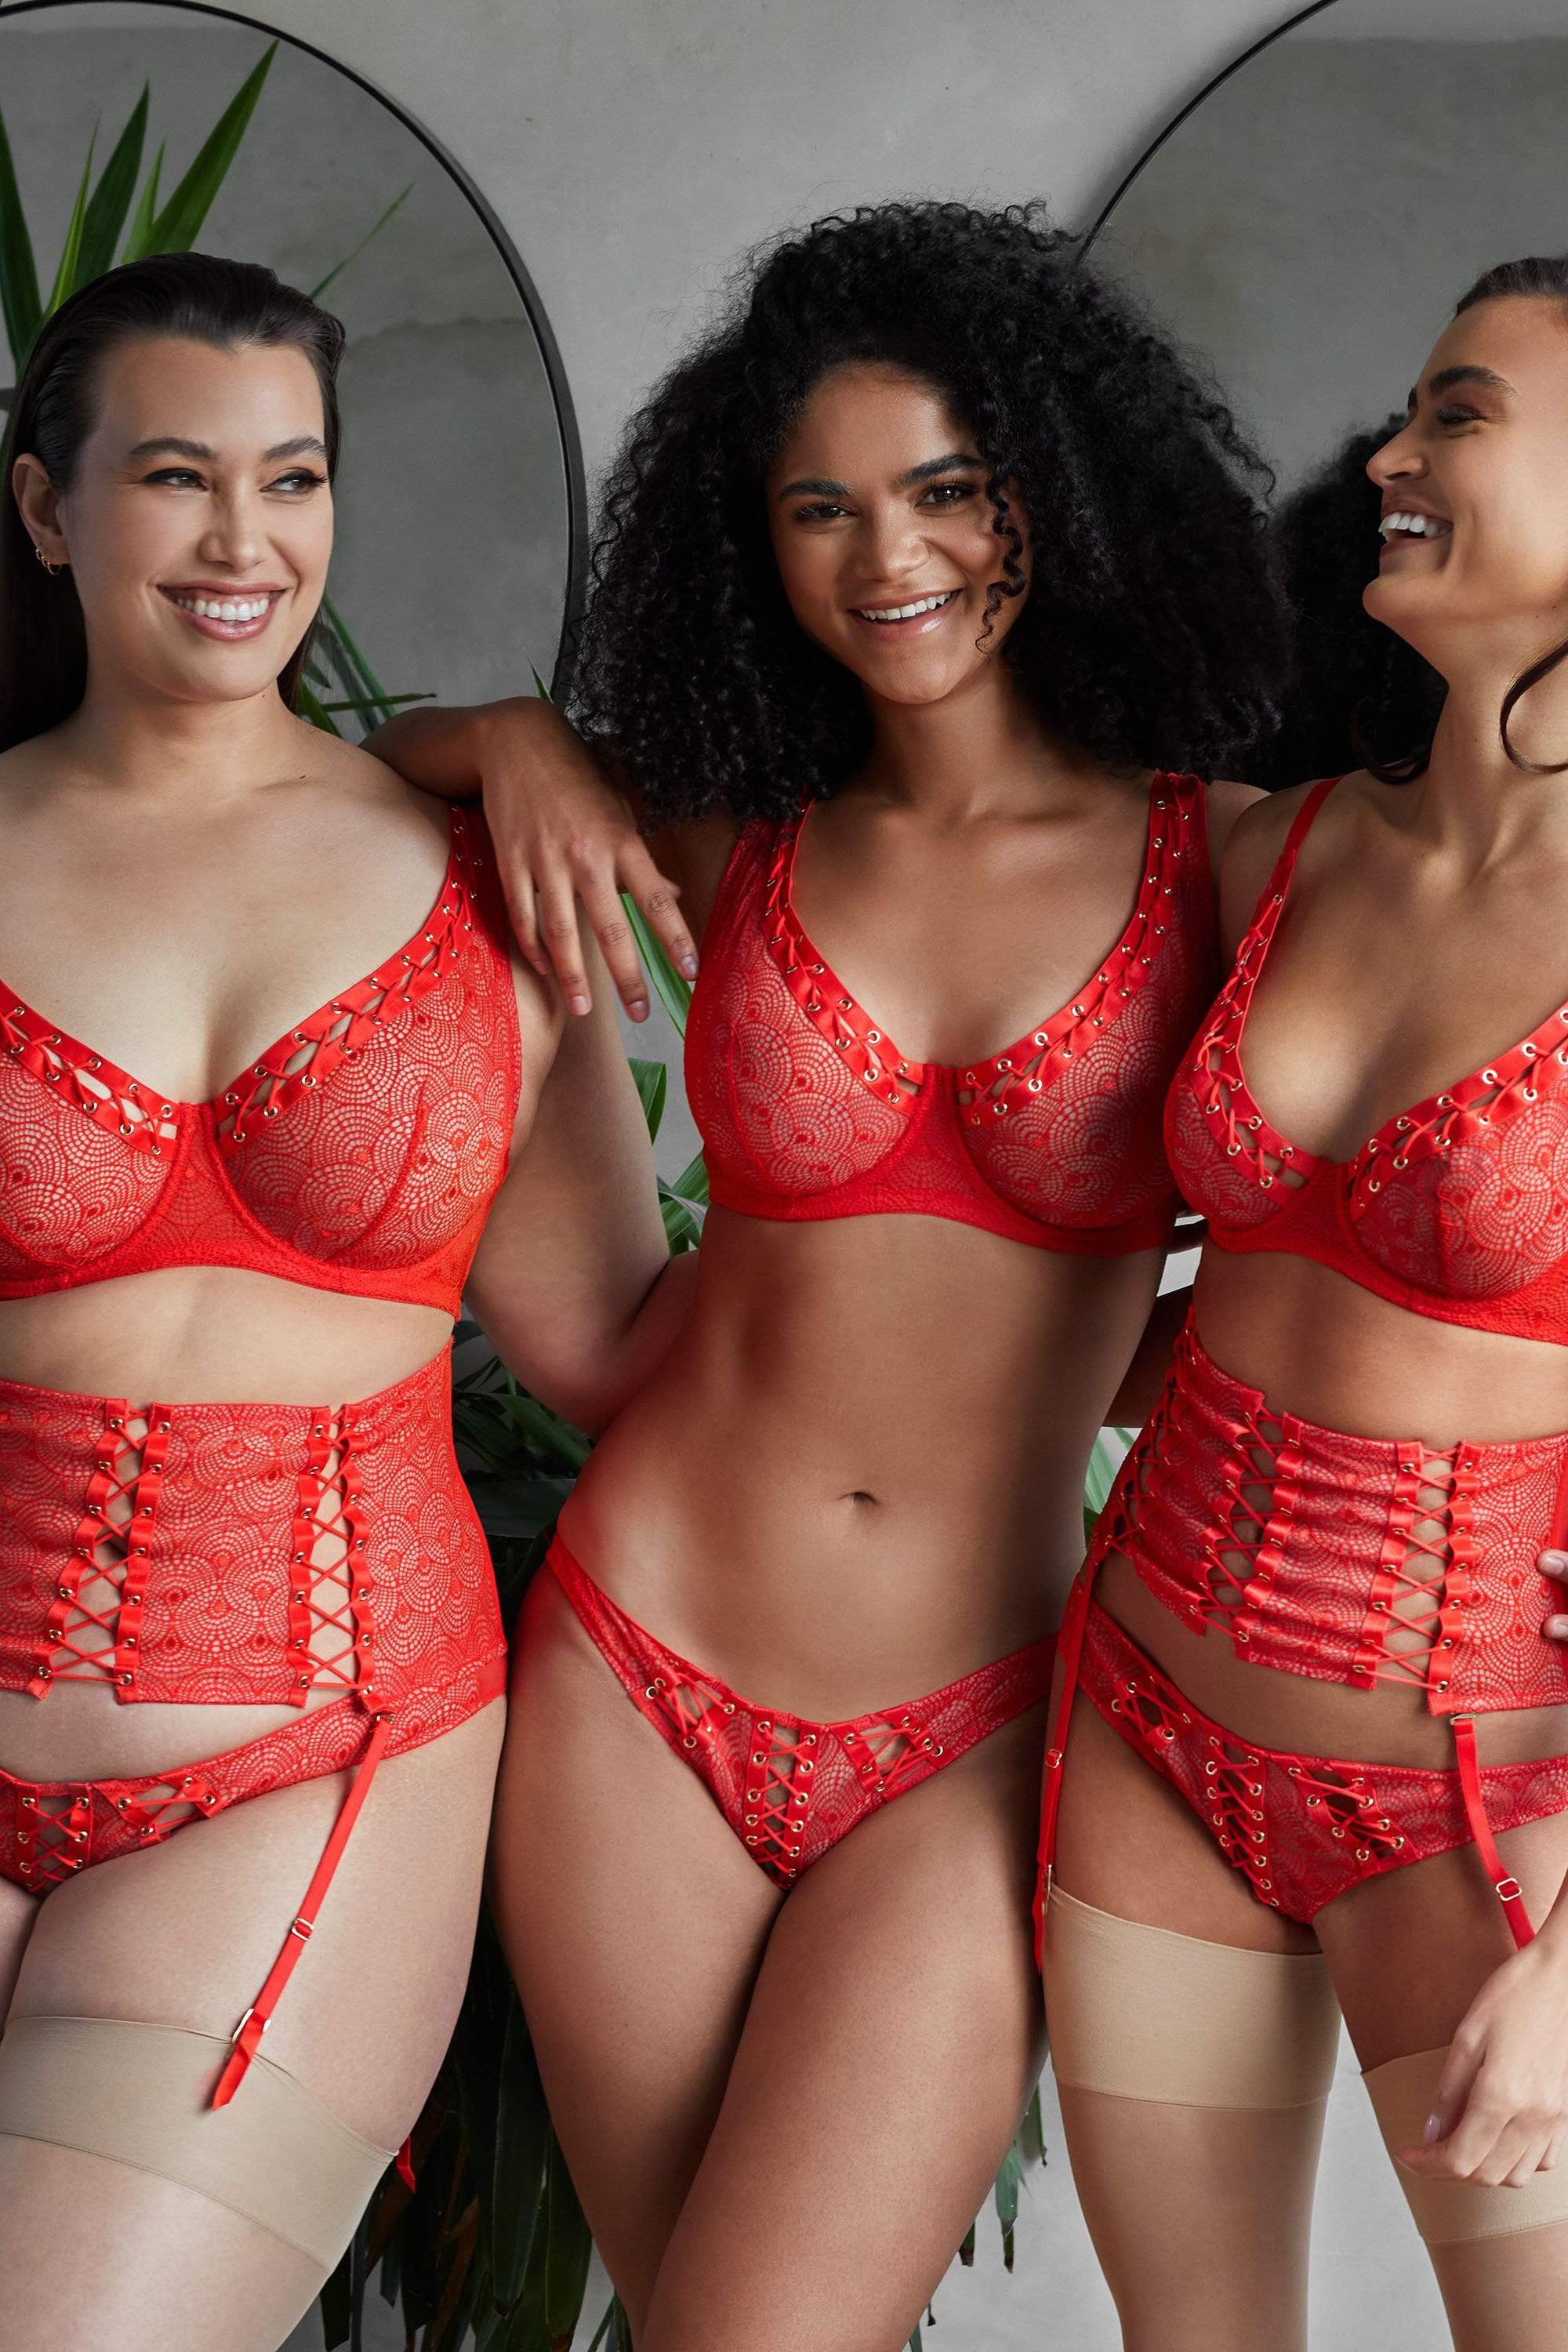 Luxury Lingerie for DD - G Cup Bra Sizes